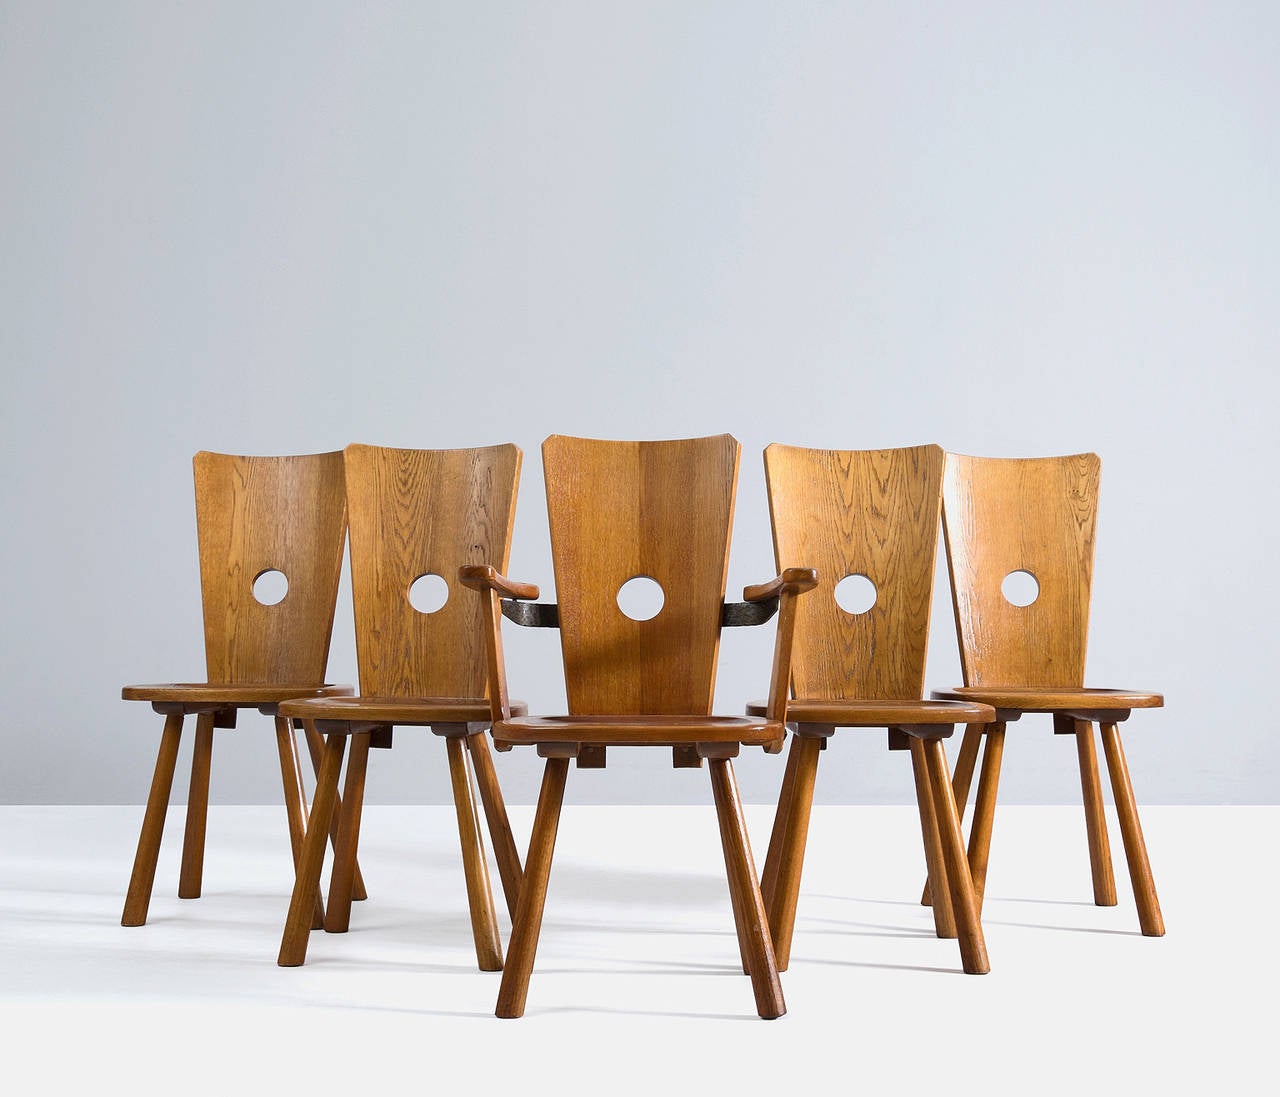 Set of five solid oak chairs from Dutch origin. This set consists of four chairs and one armchair.

The special thing about this chair is its unique shapes and proportions.
And of course it's high quality and excellent details.
